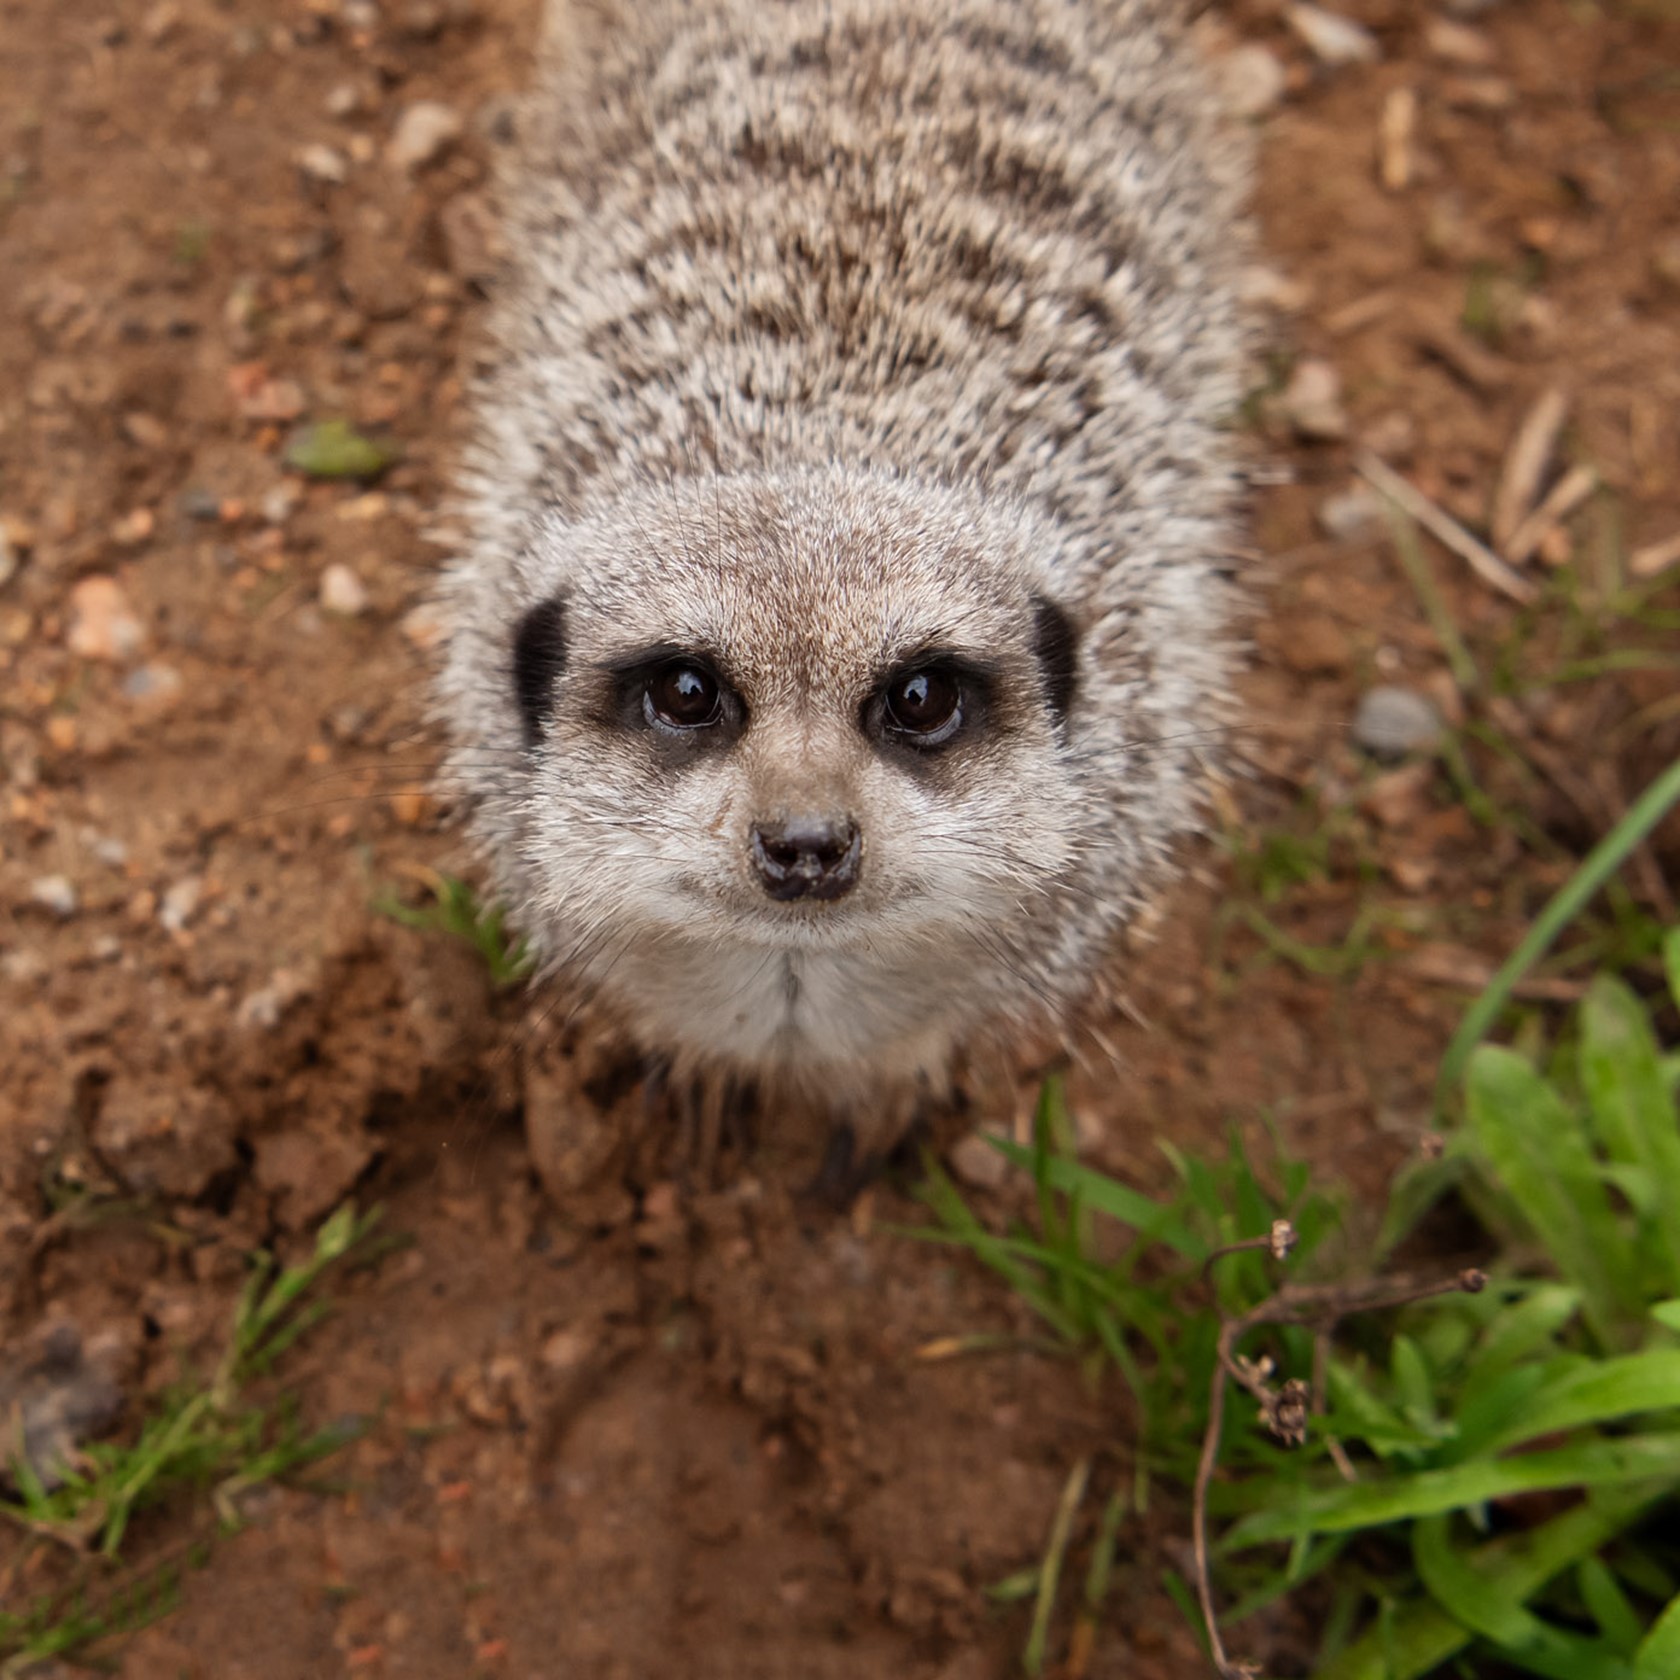 Slender Tailed Meerkat at Jersey Zoo